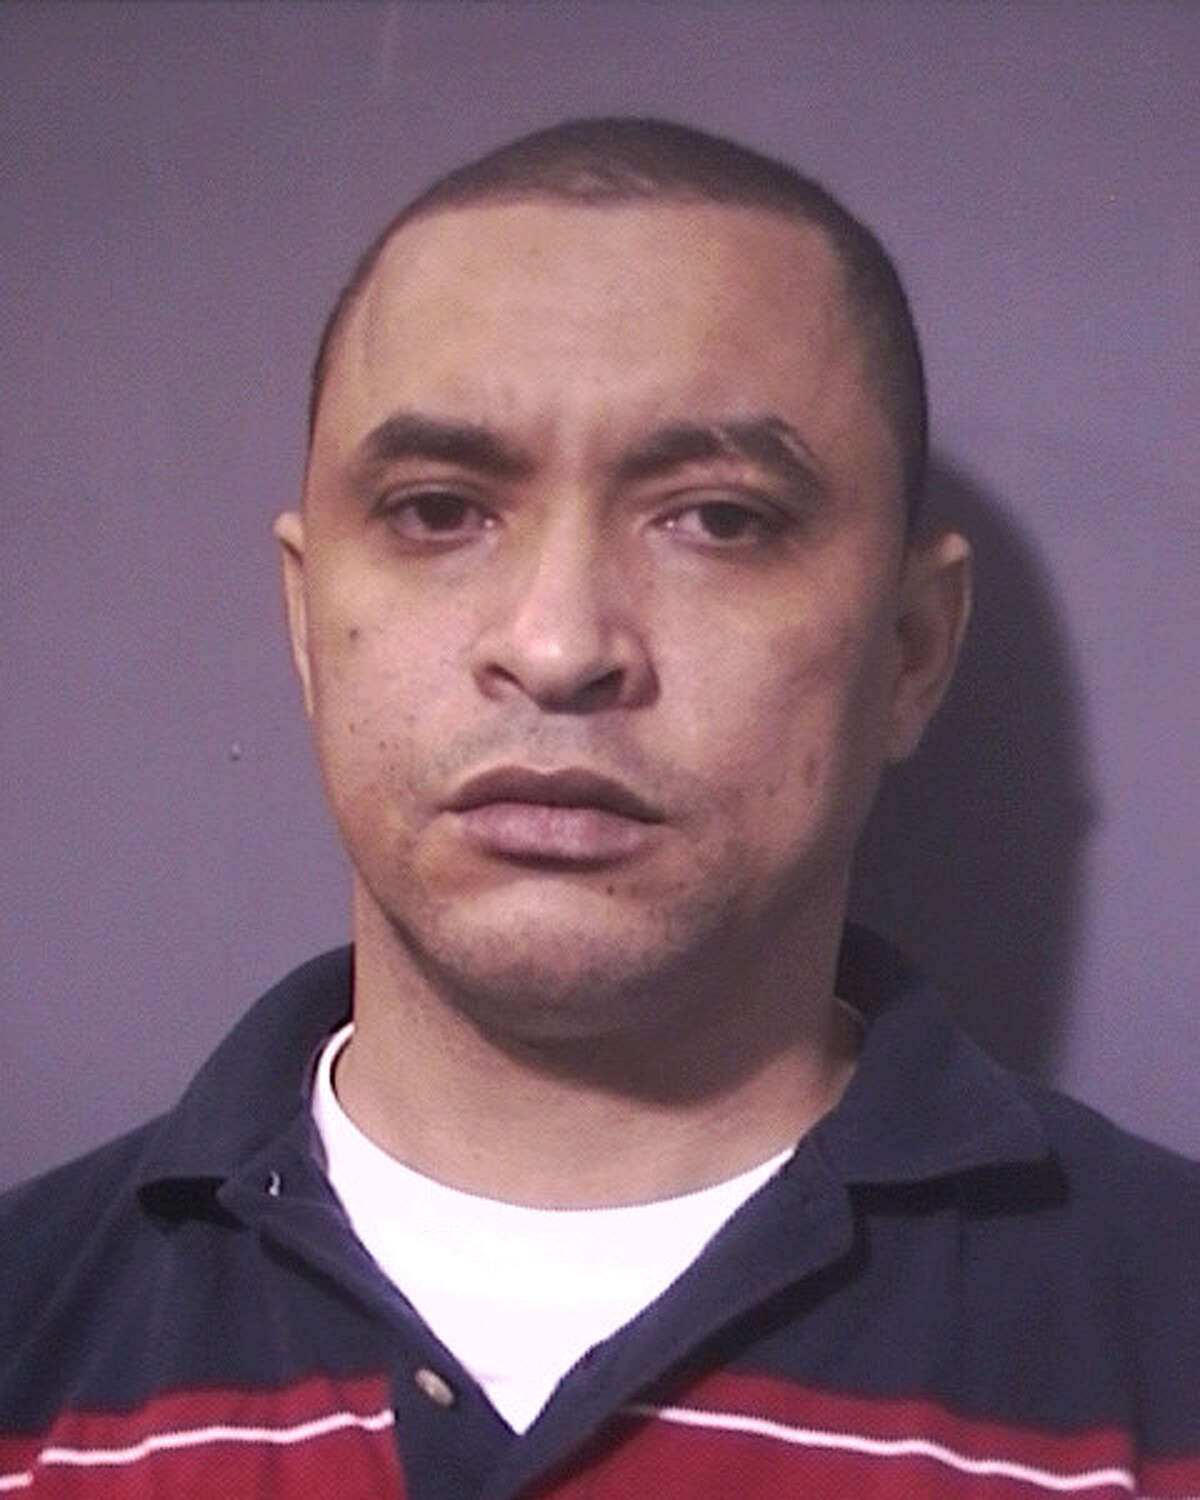 Obel Cruz-Garcia, 45, faces the death penalty for capital murder in a cold case trial opening Monday. He is accused of kidnapping and killing 6-year-old Angelo Garcia, Jr. after a home invasion on September 30, 1992.